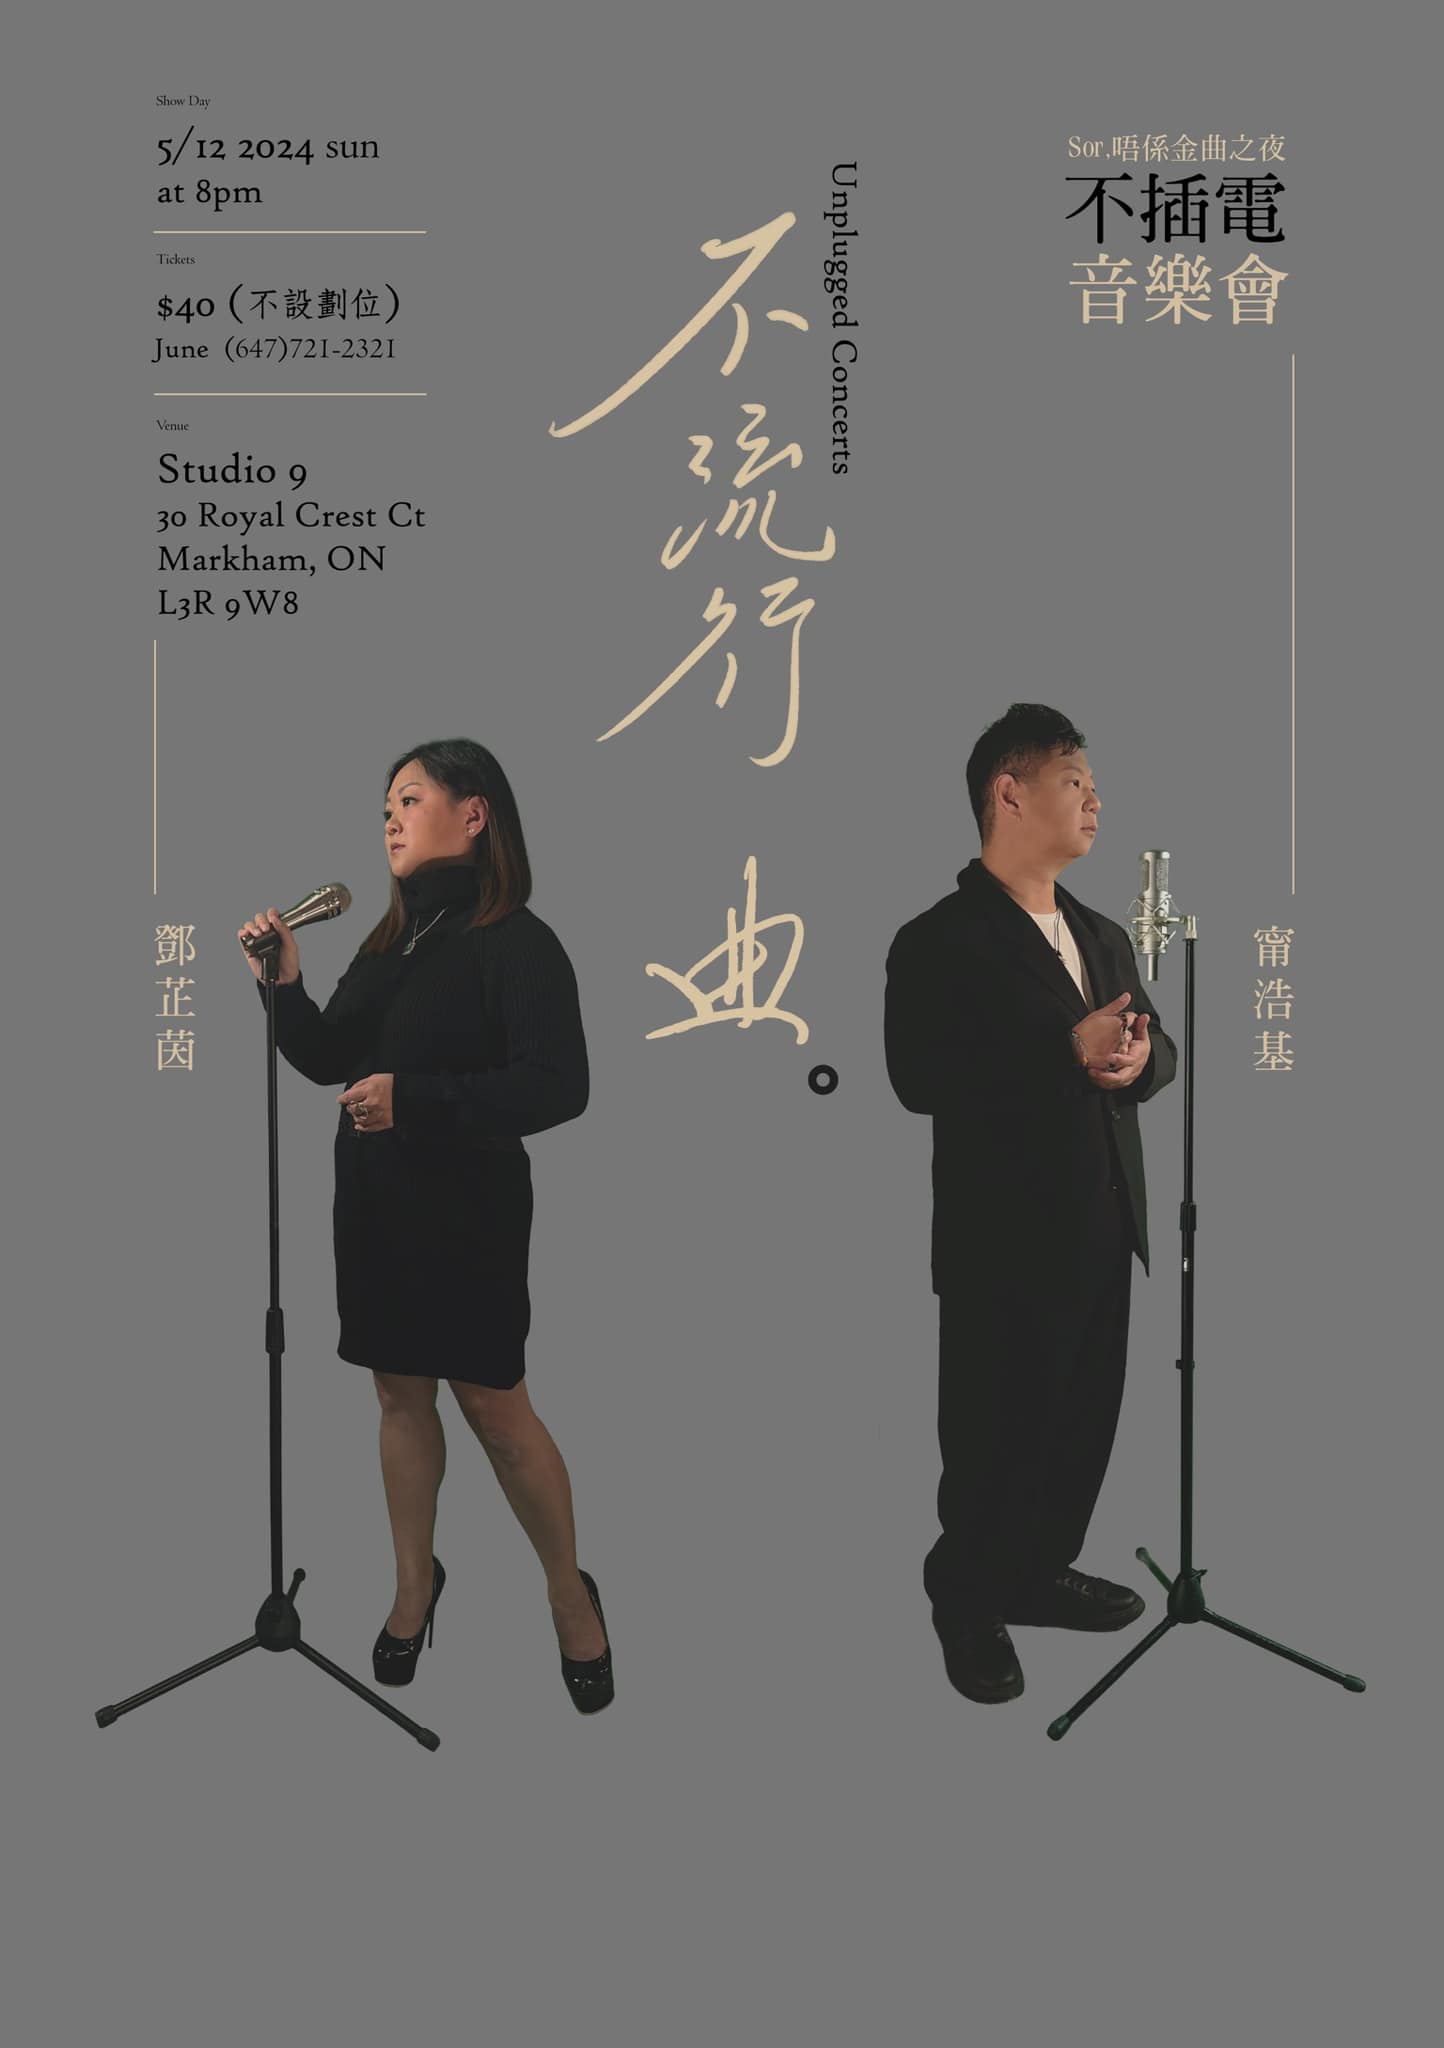 June Tang and Samson Ling, The Unplugged Concert